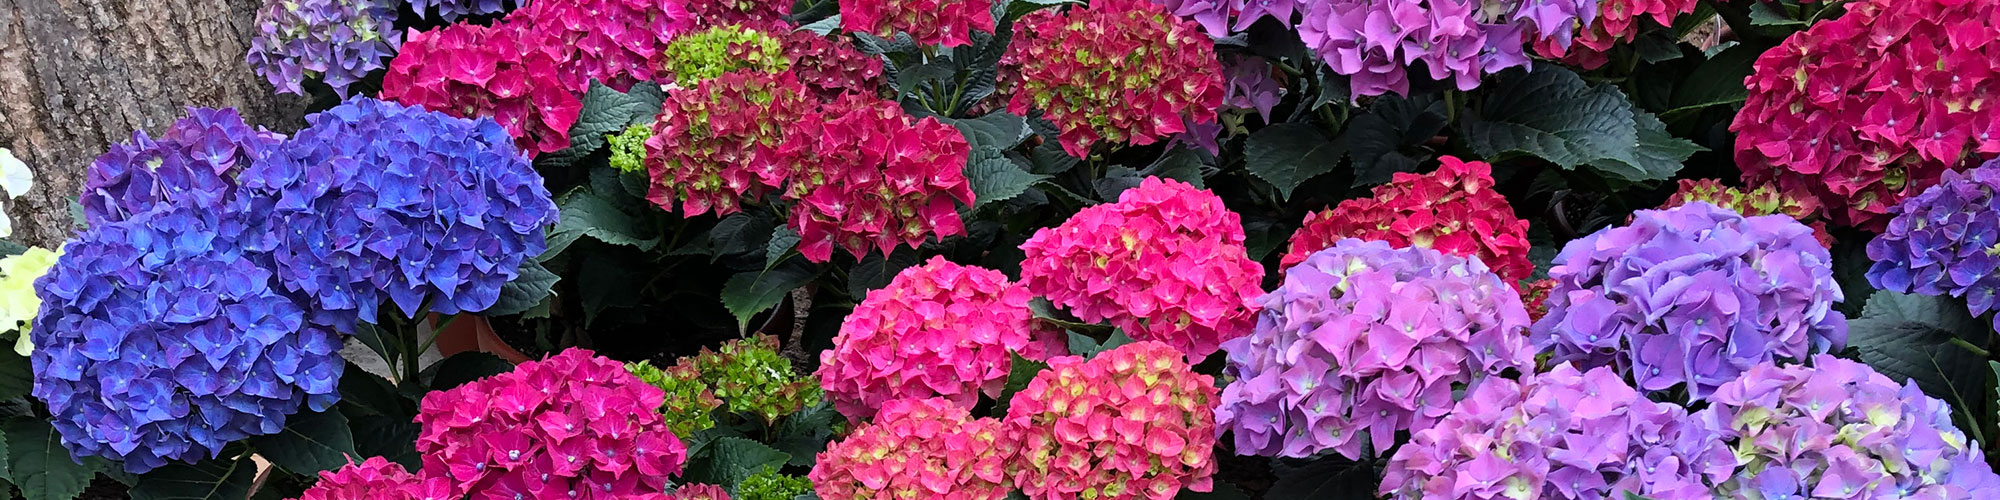 Fresh flowers waiting for you at Turnpike Greenhouse - Granton Wisconsin - flowers, houseplants, vegetables, progressive greenhouse, quality plants, planters, gifts